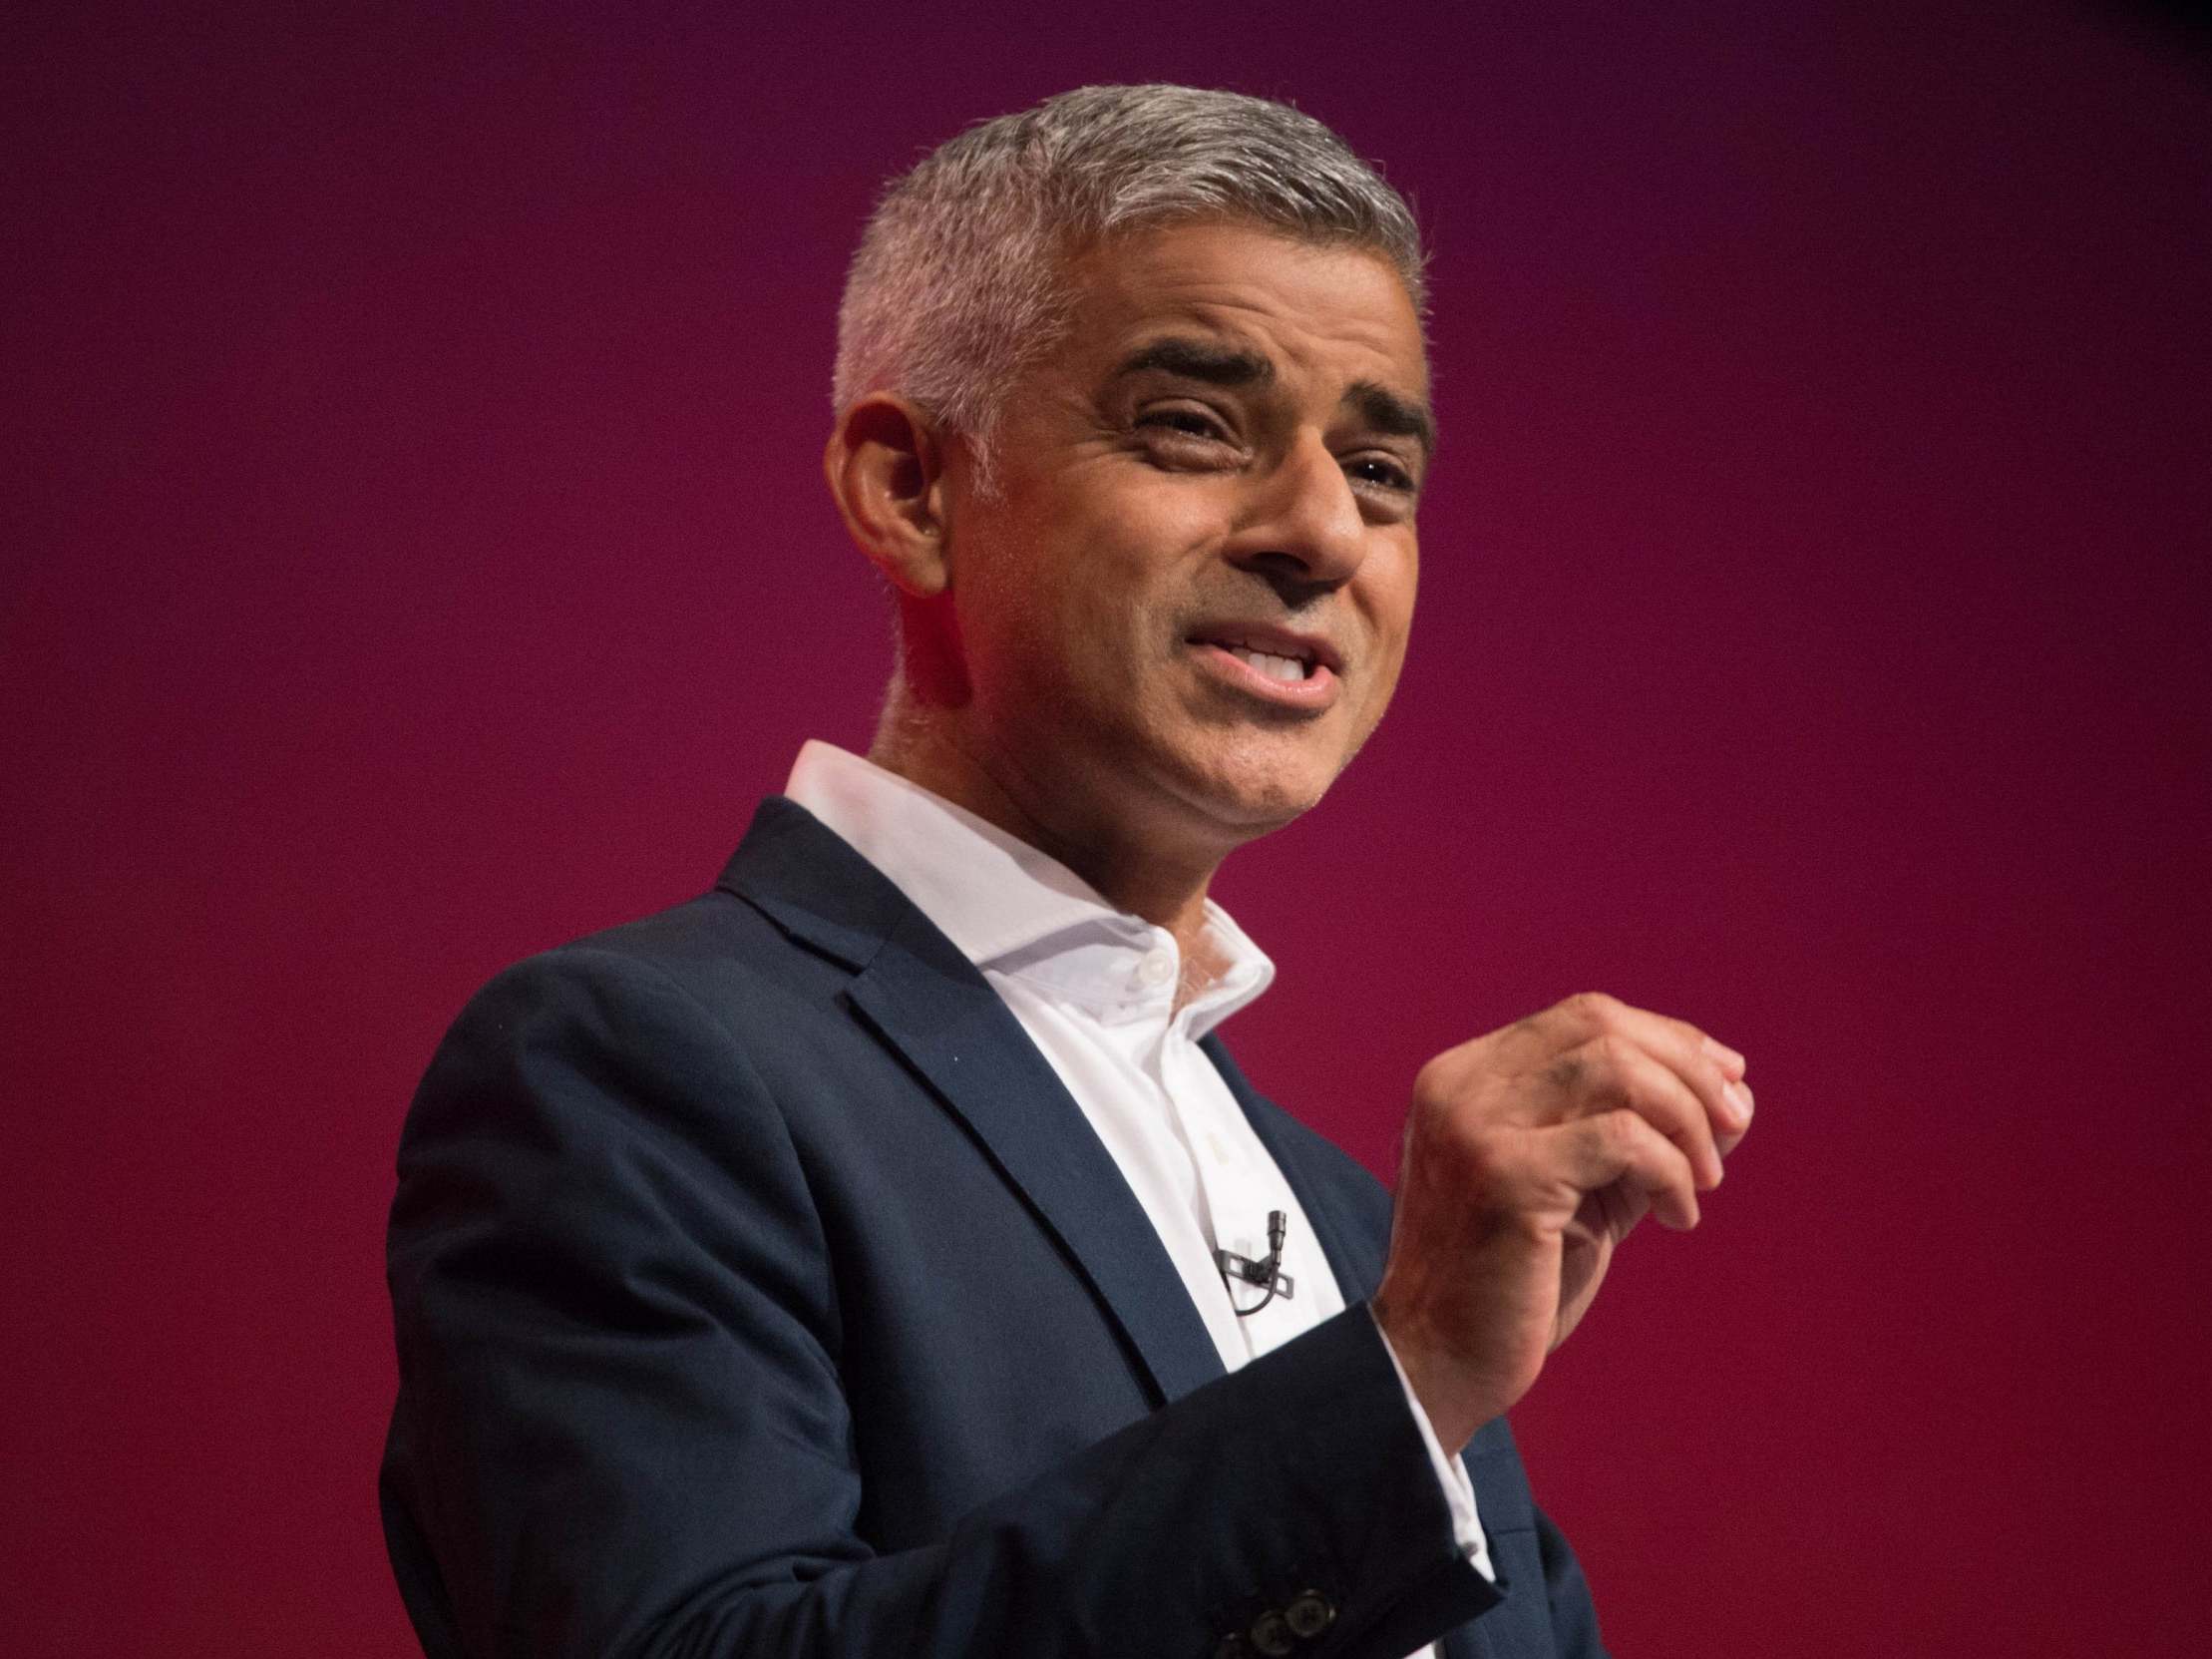 According to a survey, Sadiq Khan is expected to win the next election